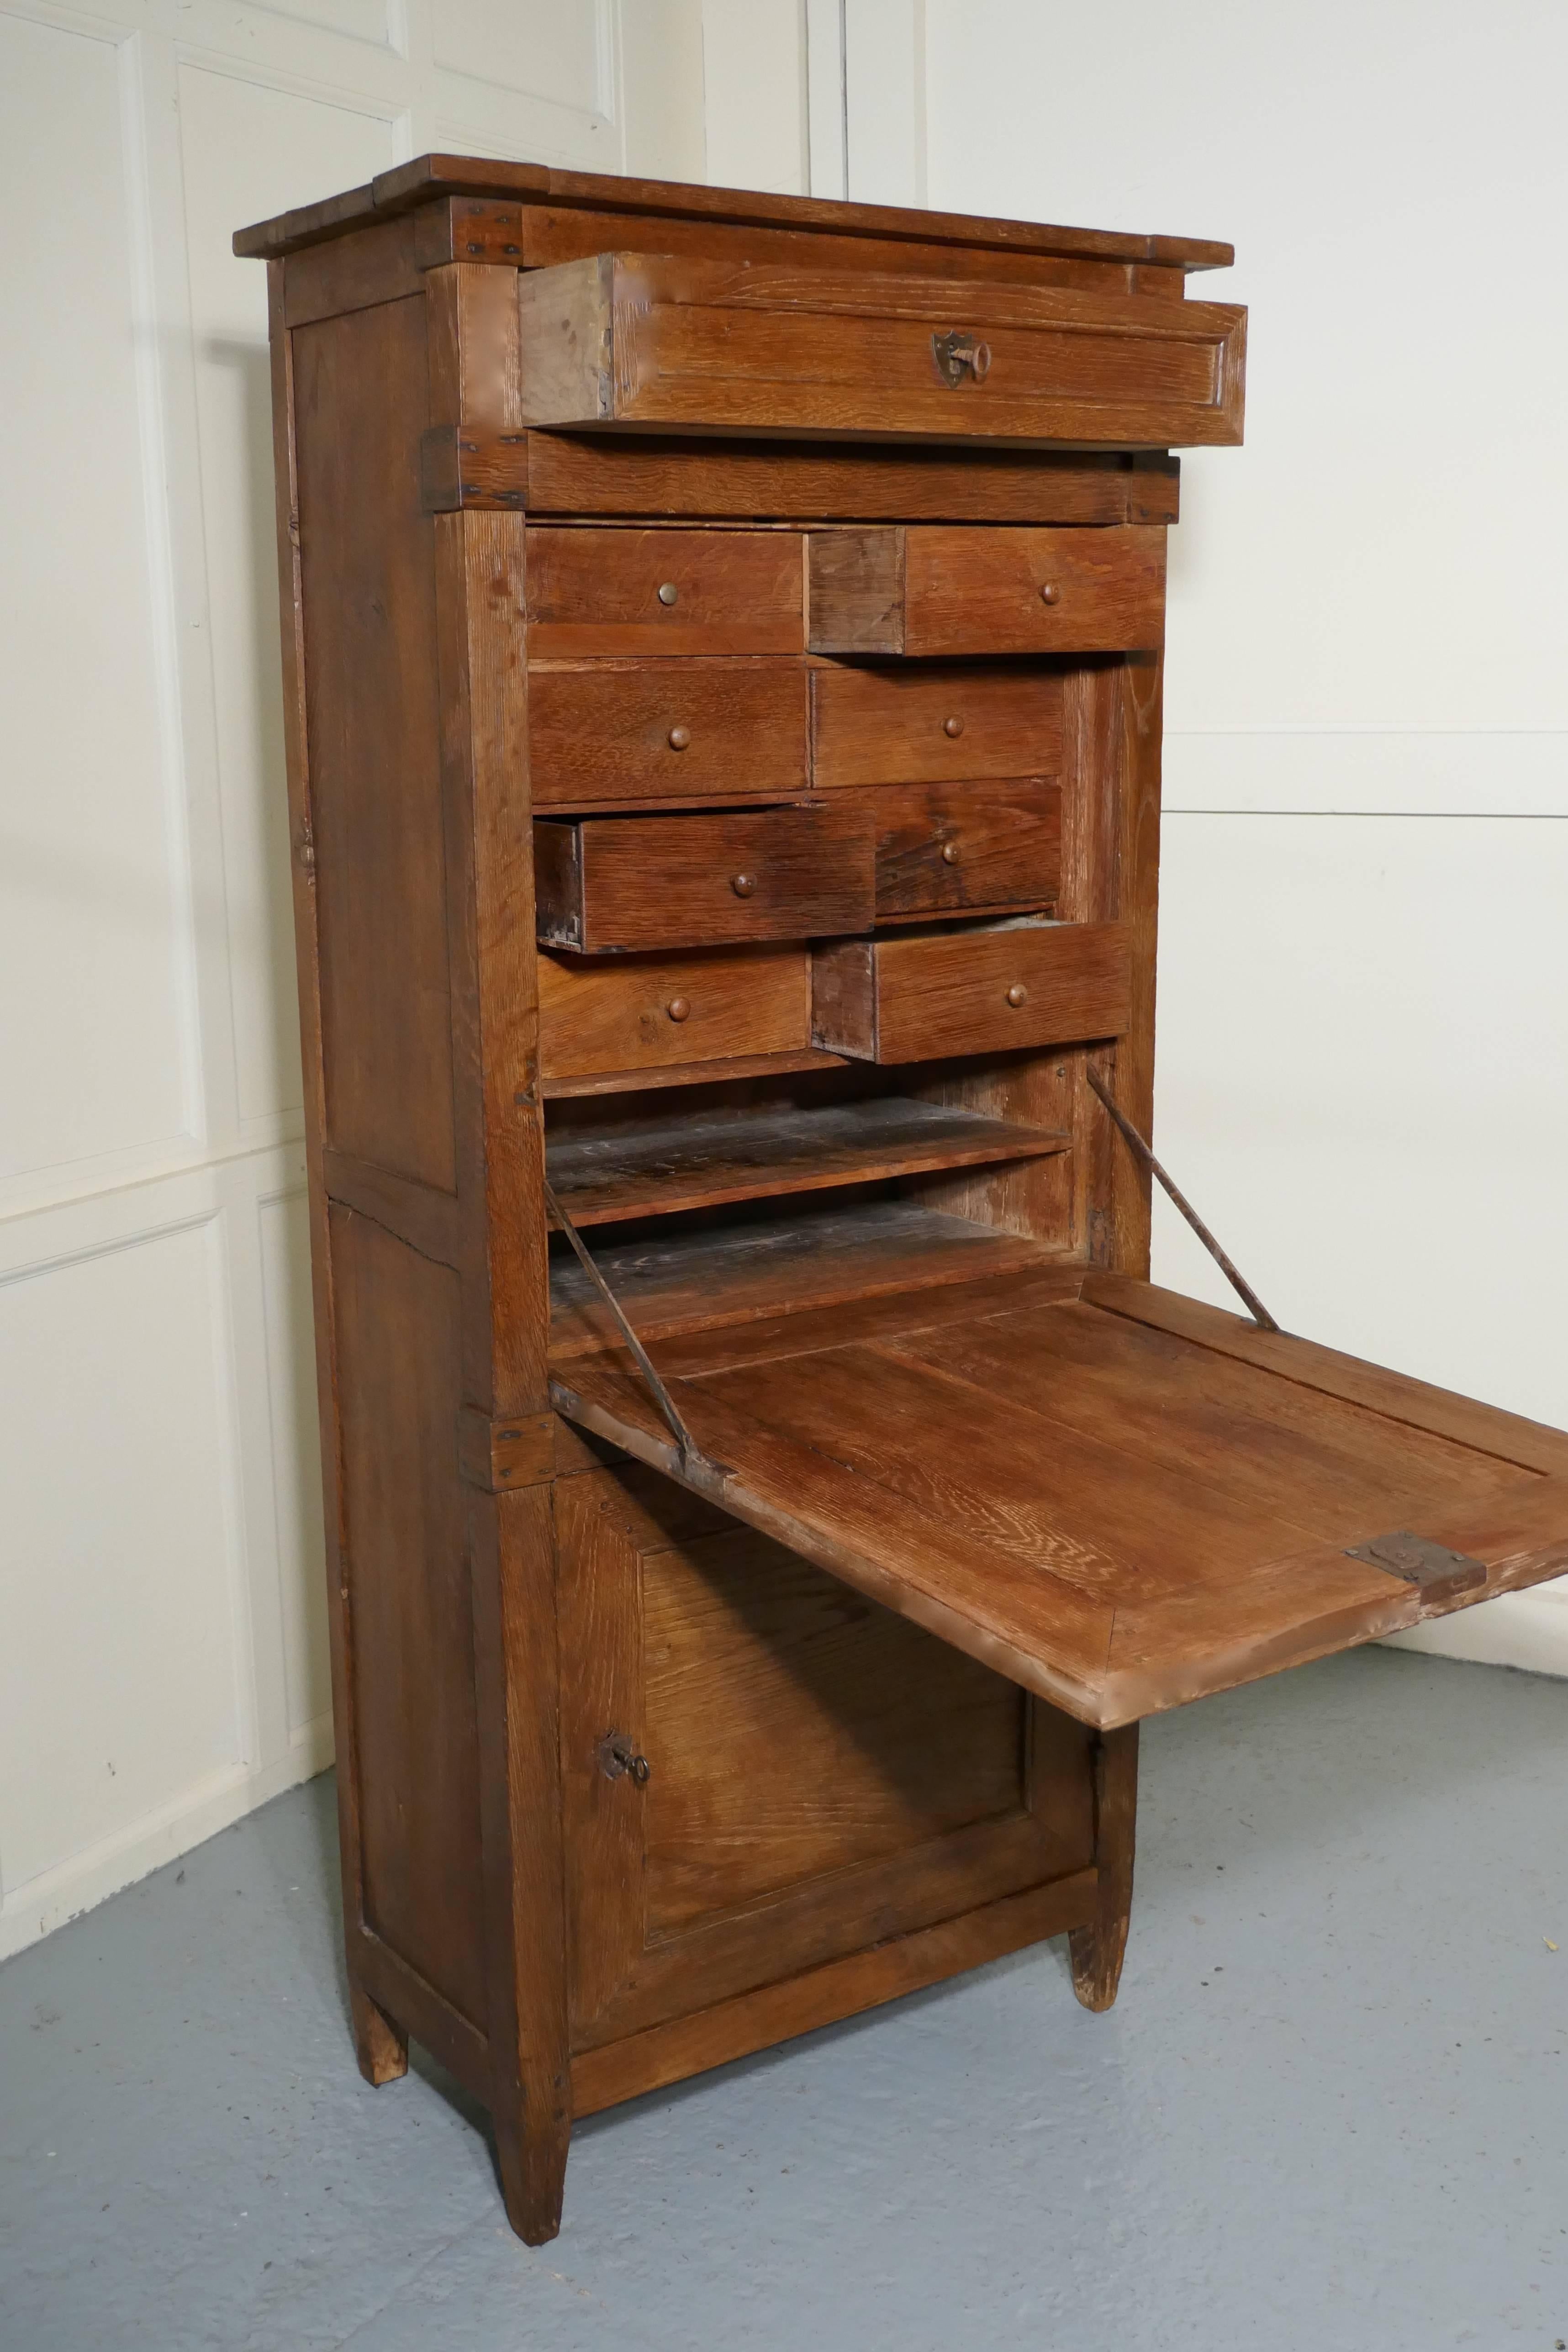 17th century French country oak secrétaire à abattant

This is a lovely and very old piece, the cabinet is tall and narrow, it has a drawer at the top and a fall in the centre with a single shelved cupboard beneath. The interior of the bureau has